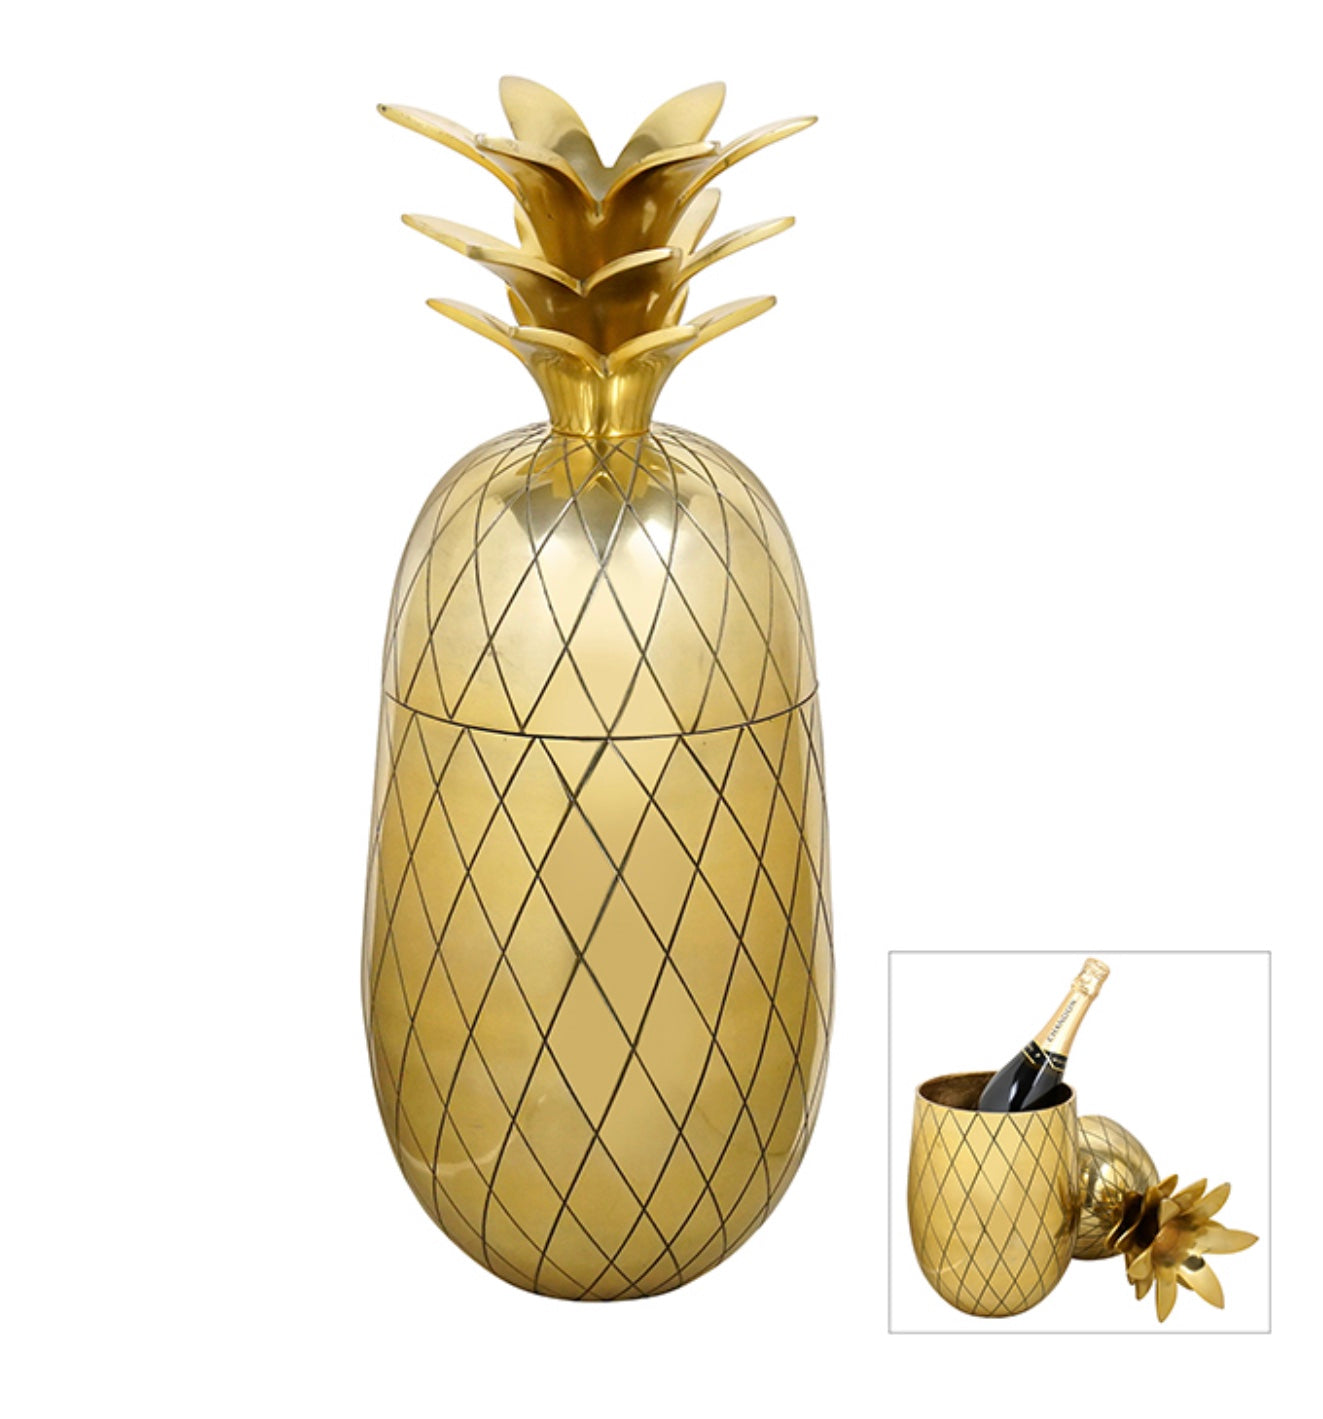 GOLD PINEAPPLE CHAMPAGNE BUCKET